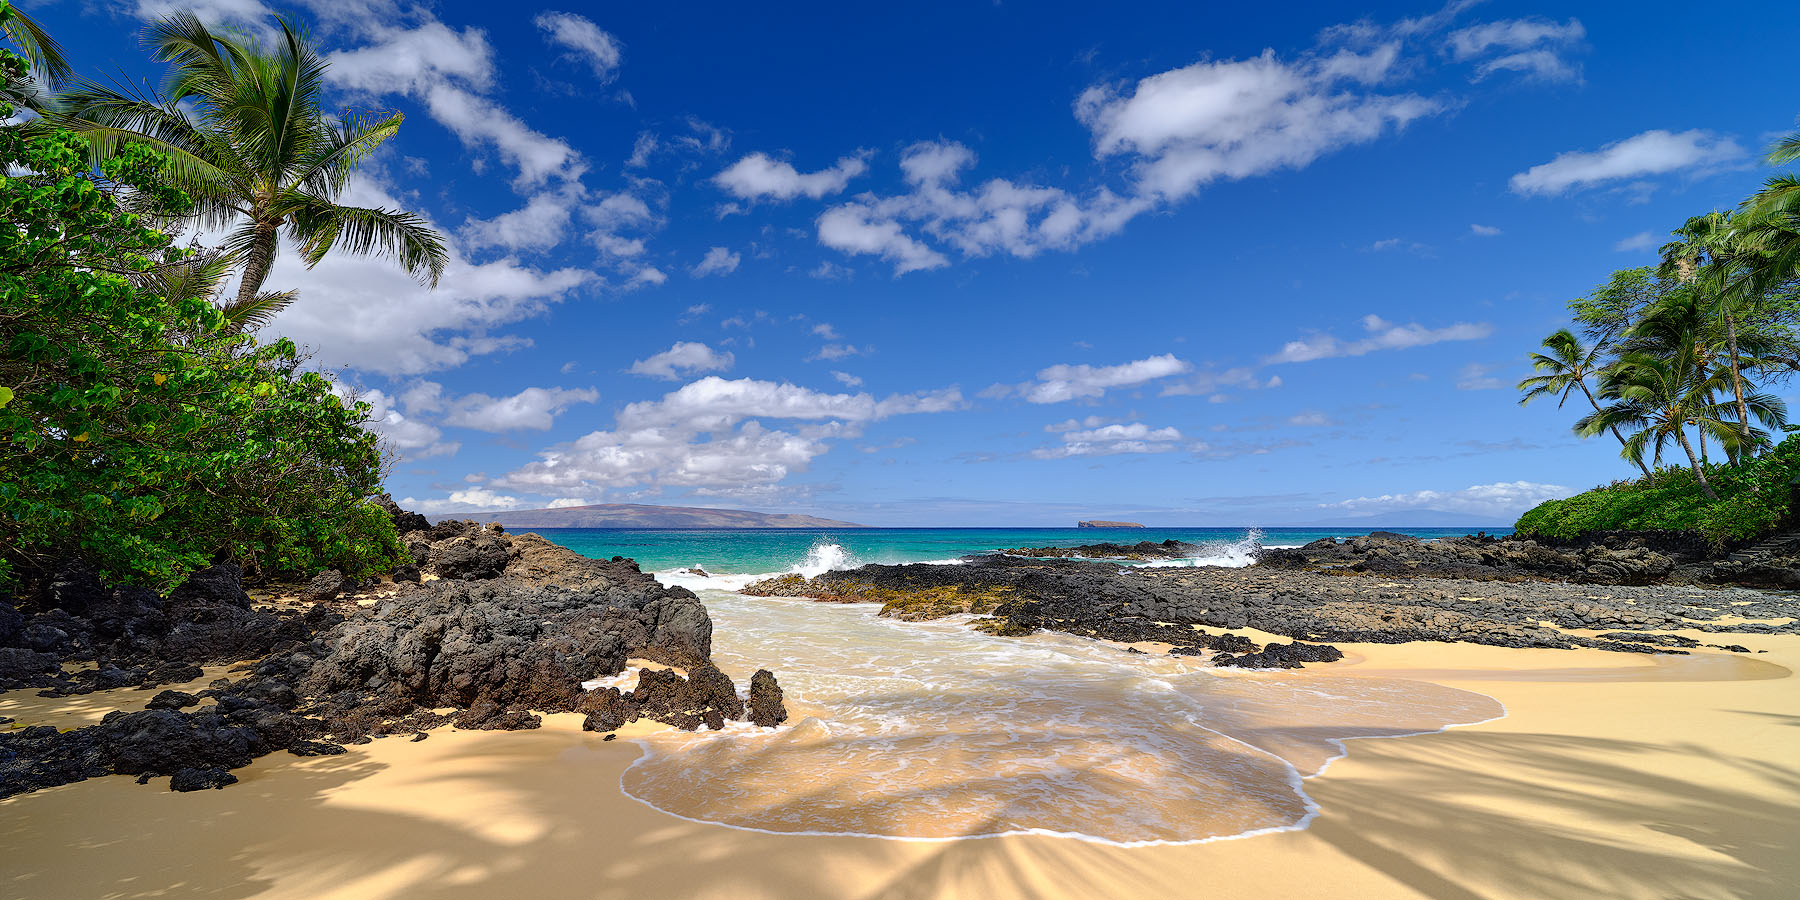 panoramic view of Secret Beach on the island of Maui with the shadows from the palm trees in the foreground as a wave comes in